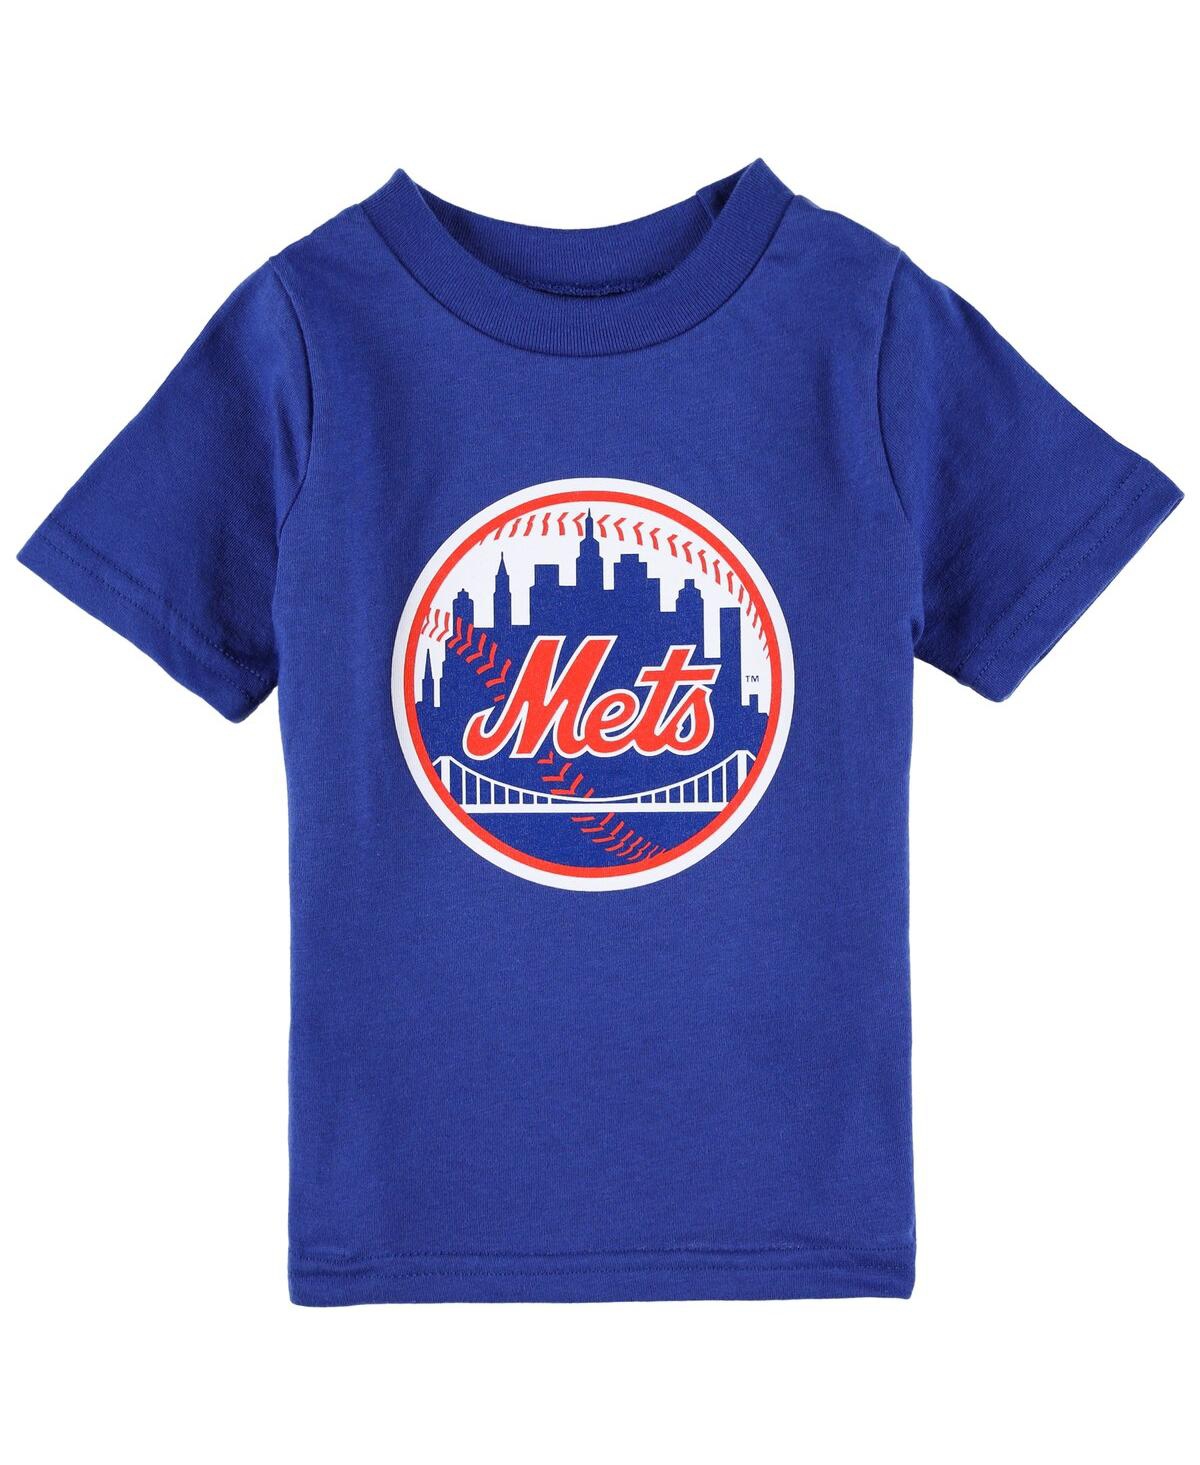 Outerstuff Babies' Infant Boys And Girls Royal New York Mets Team Crew Primary Logo T-shirt